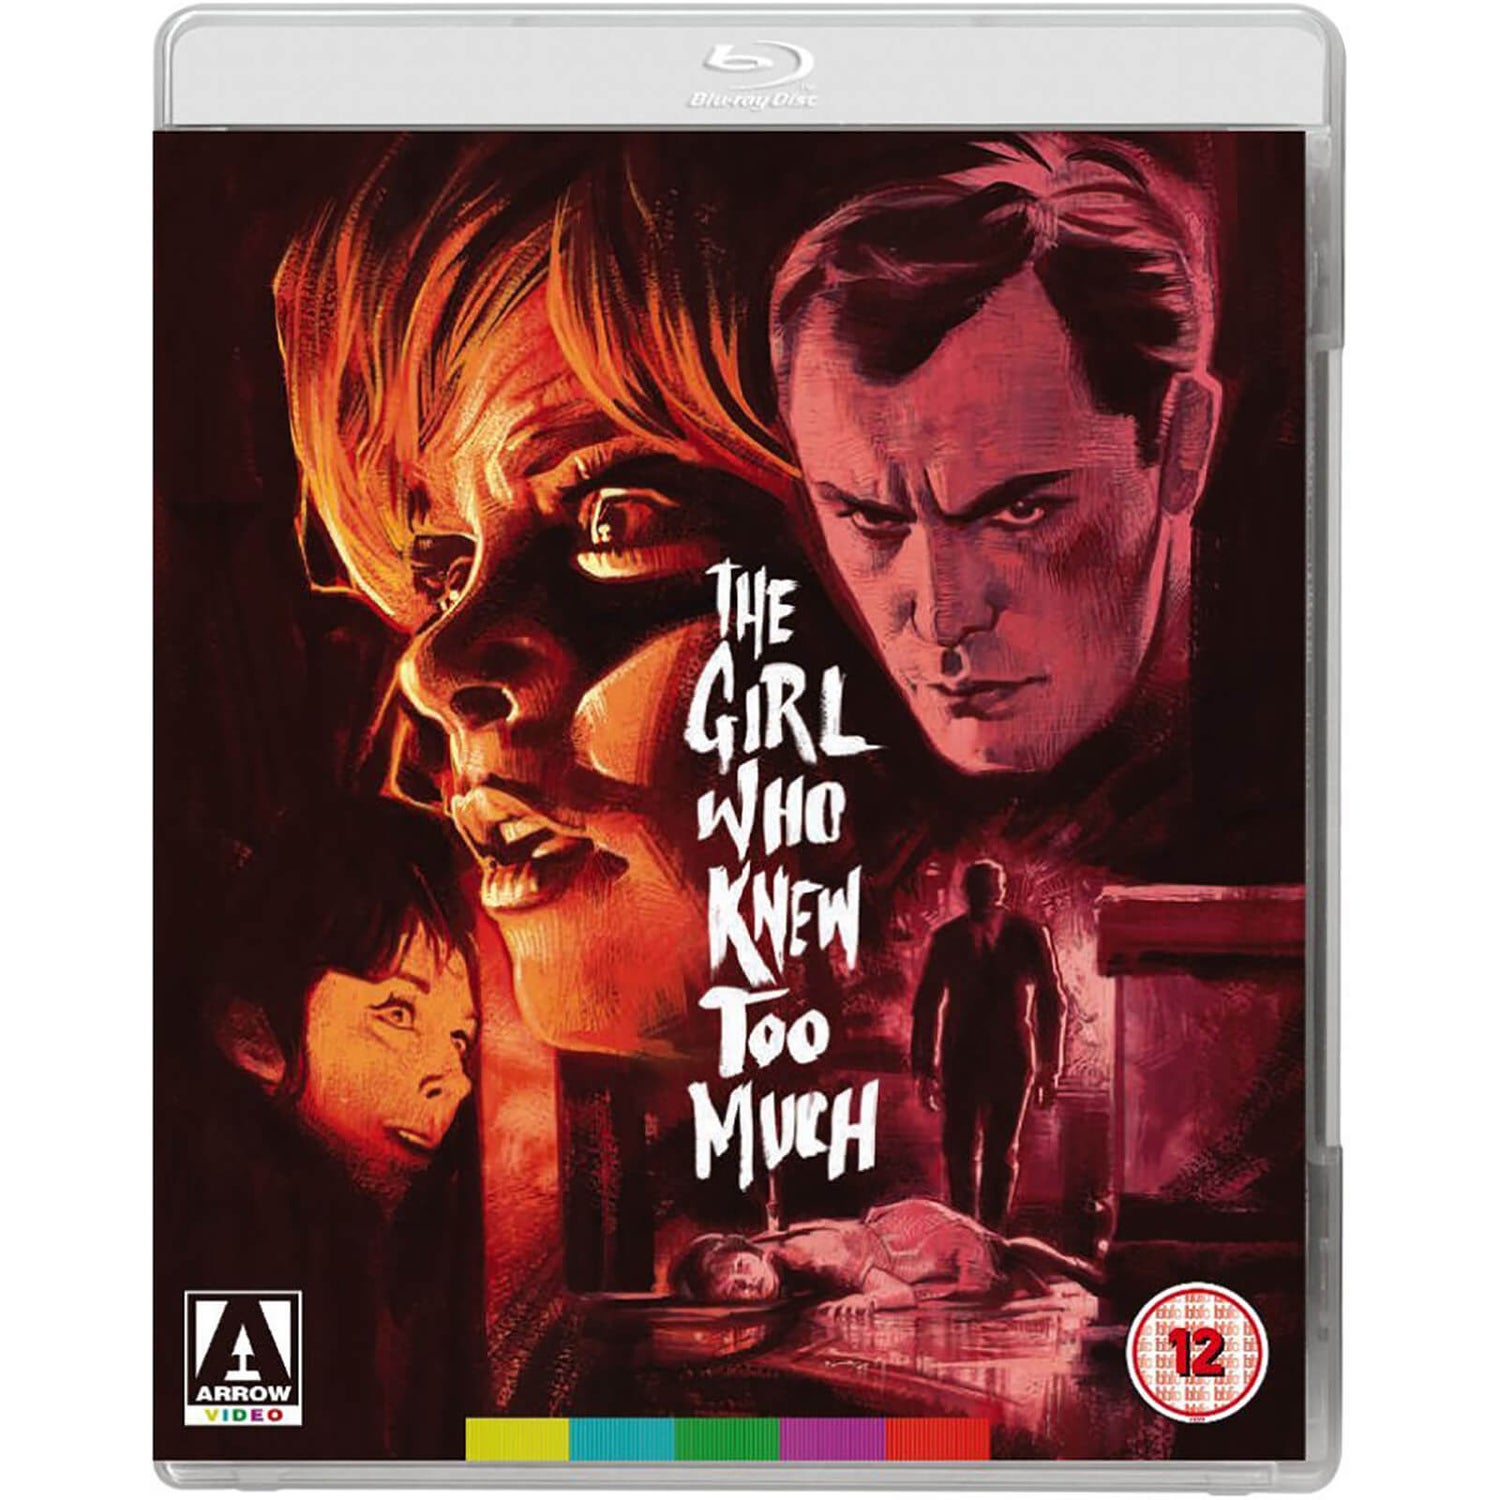 The Girl Who Knew Too Much (Includes DVD)